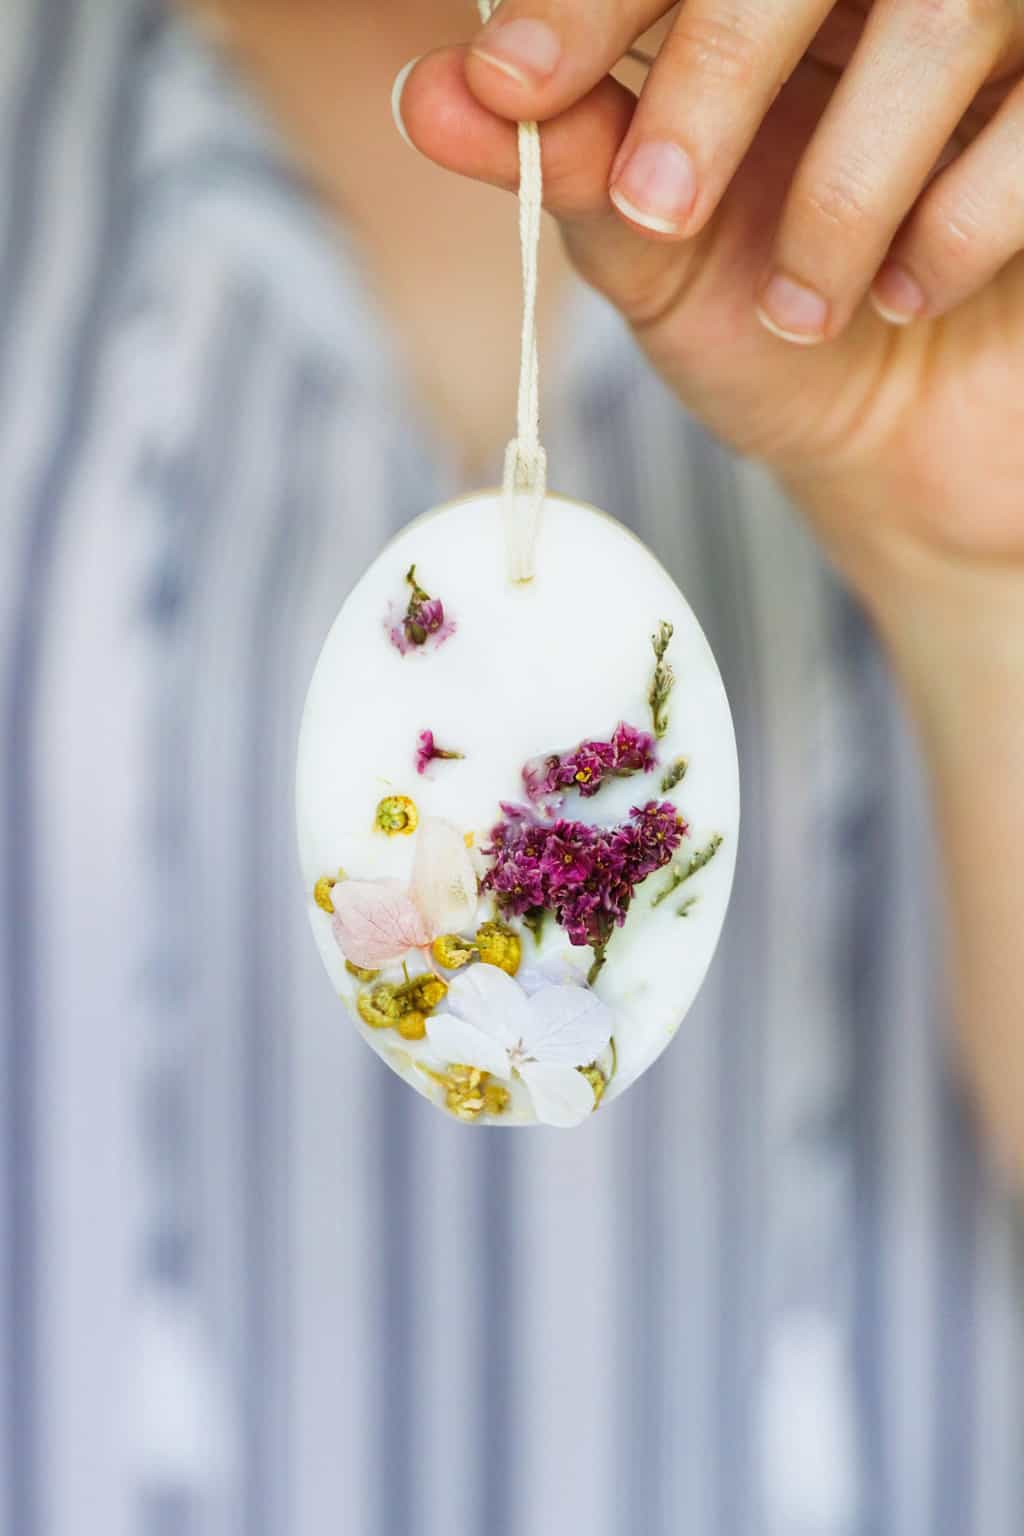 How to use essential oil sachets to scent your home